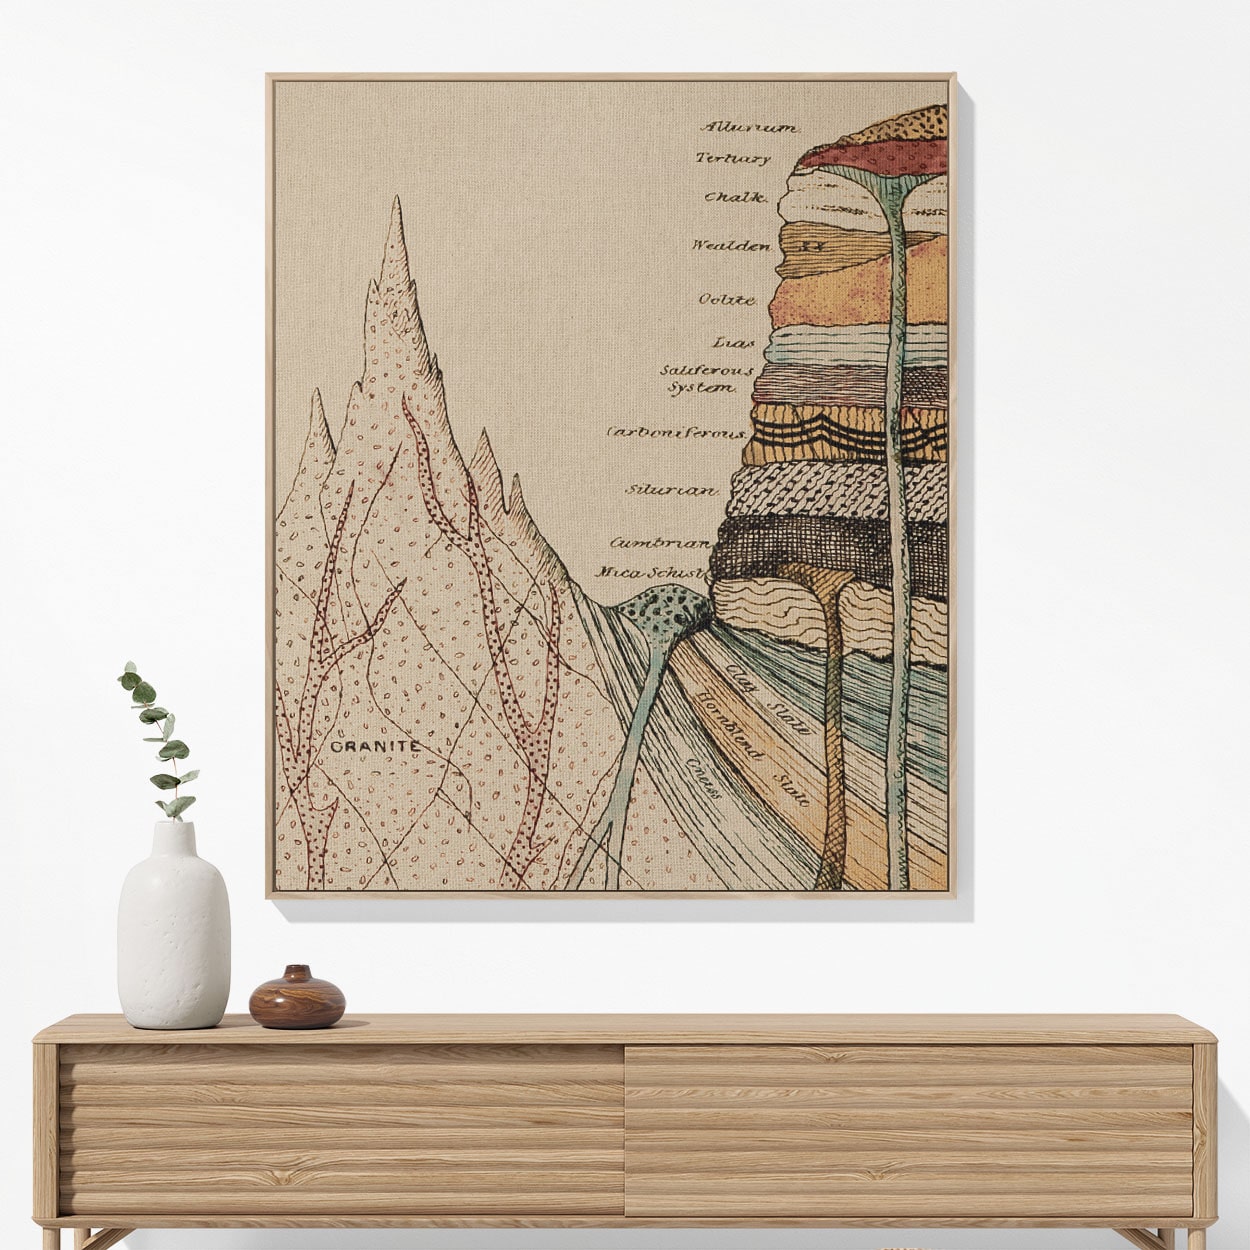 Cool Science Woven Blanket Woven Blanket Hanging on a Wall as Framed Wall Art